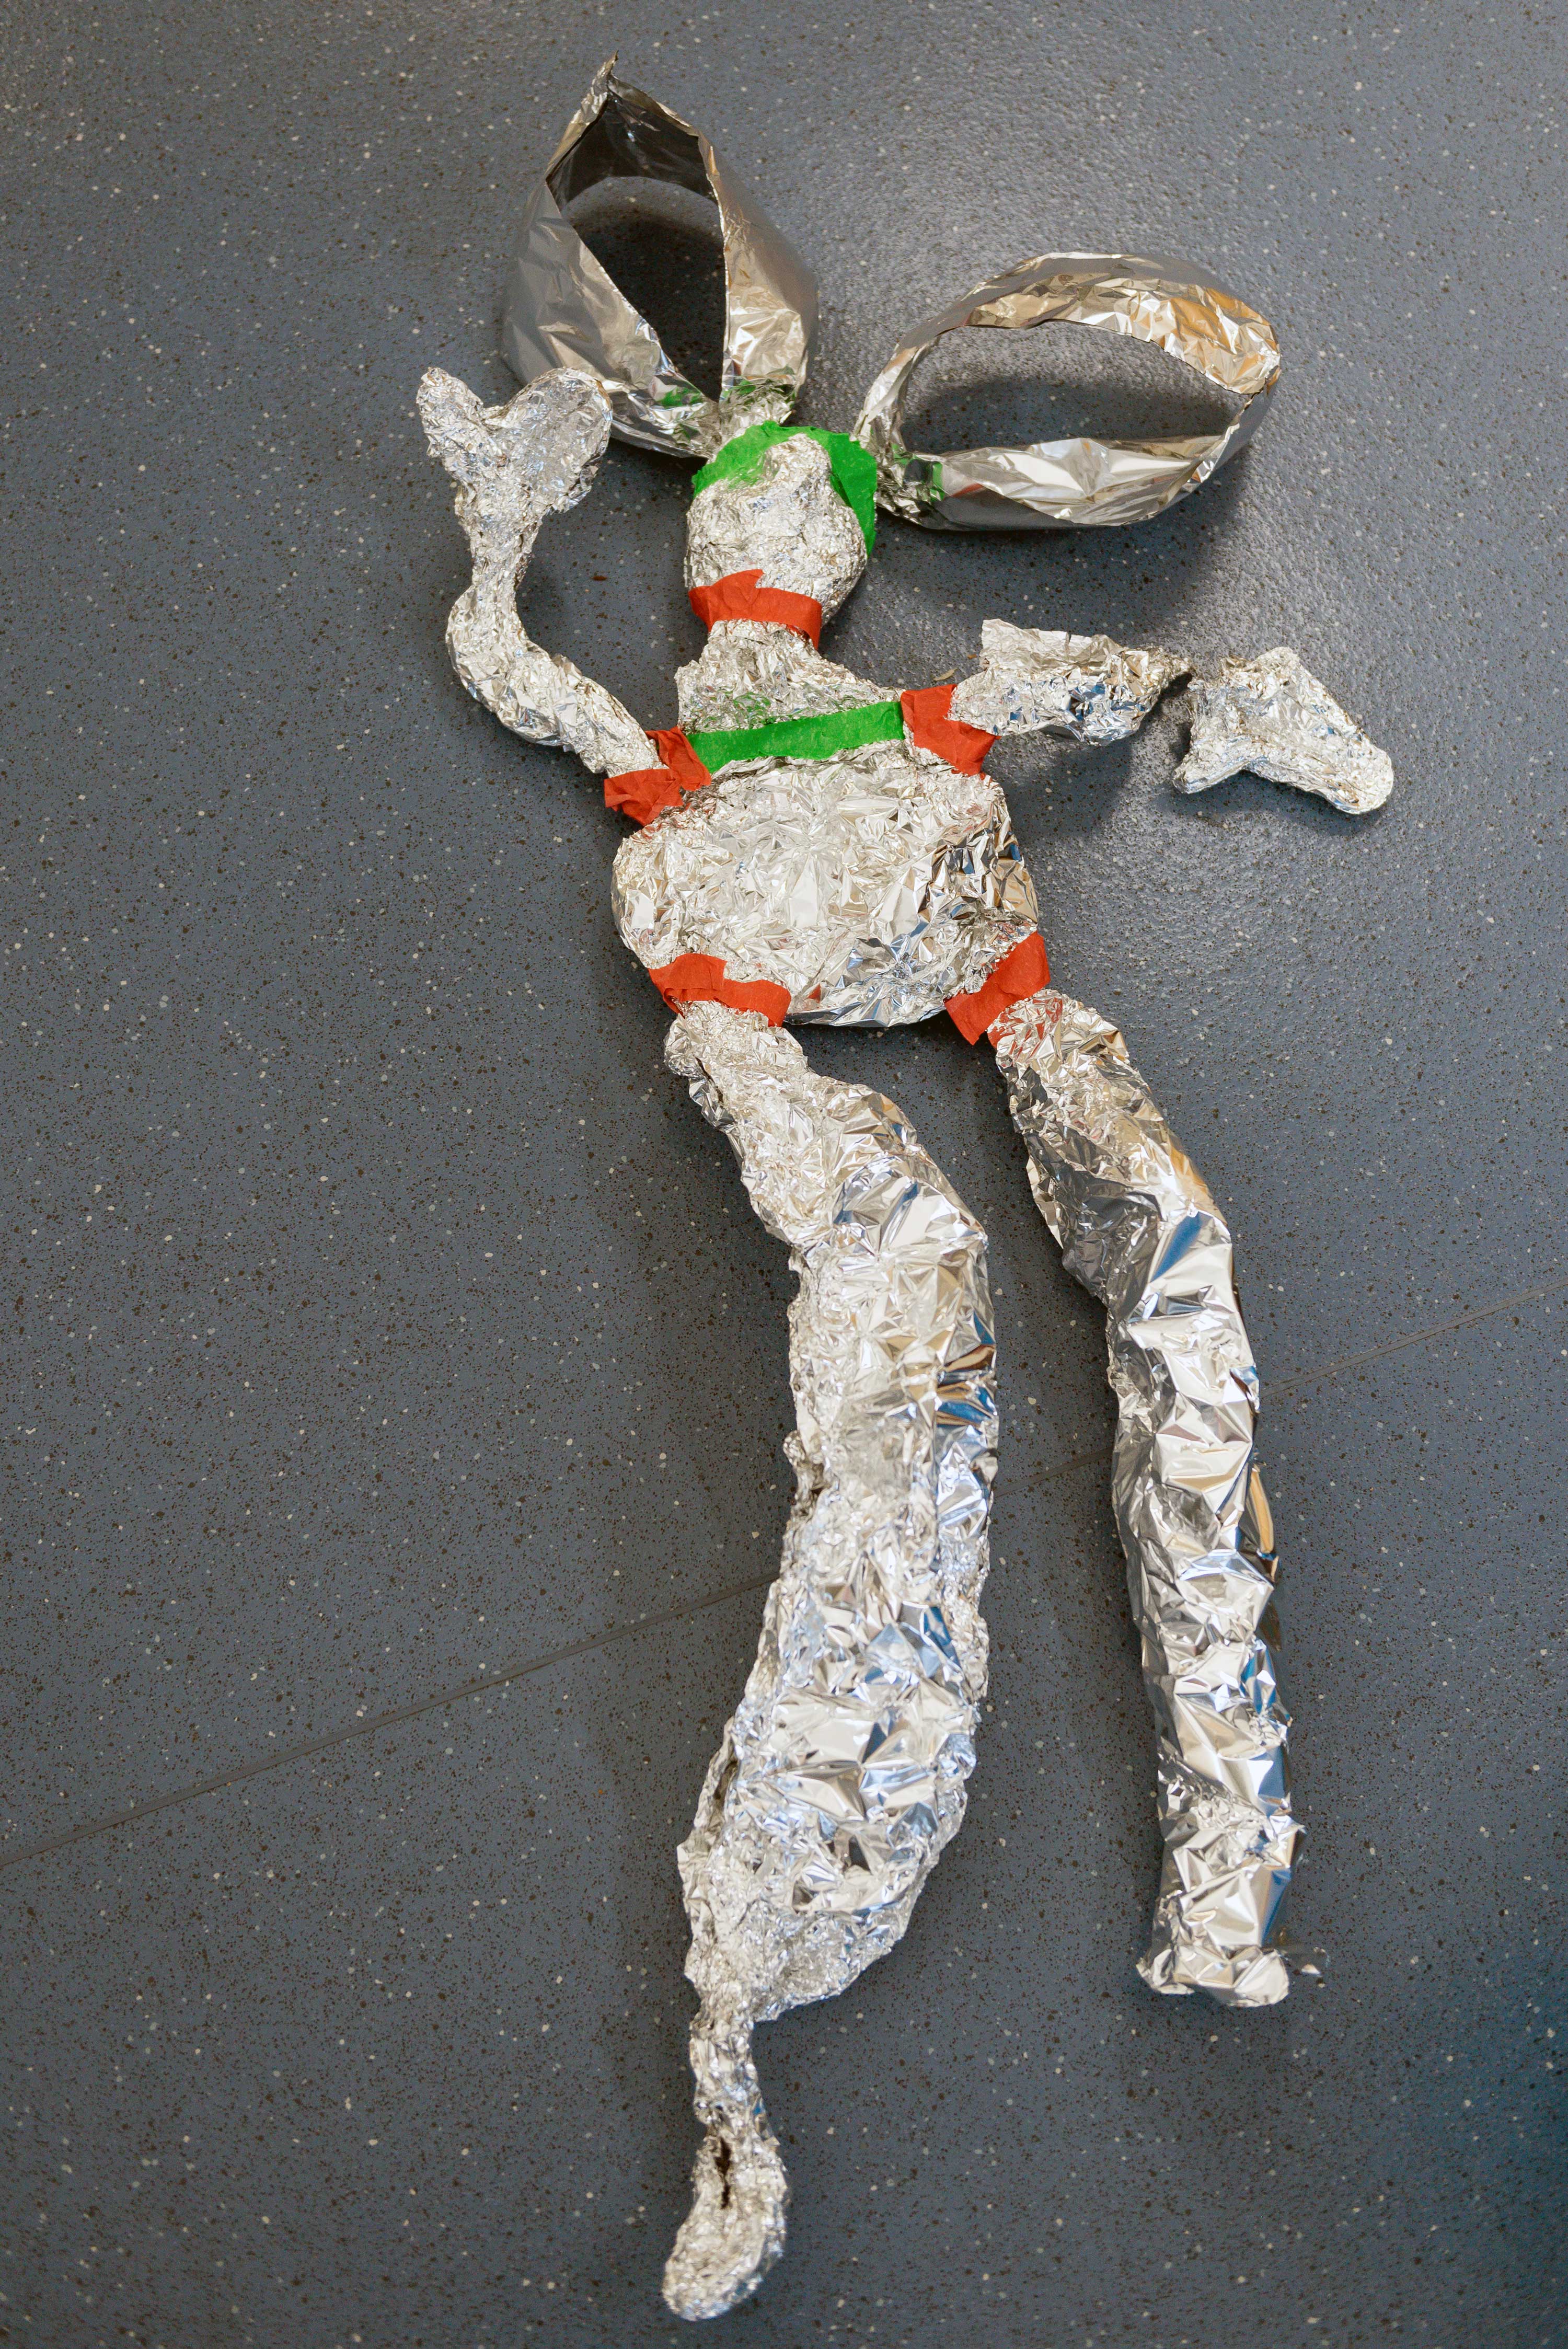 A large scale sculpture of a body made of foil